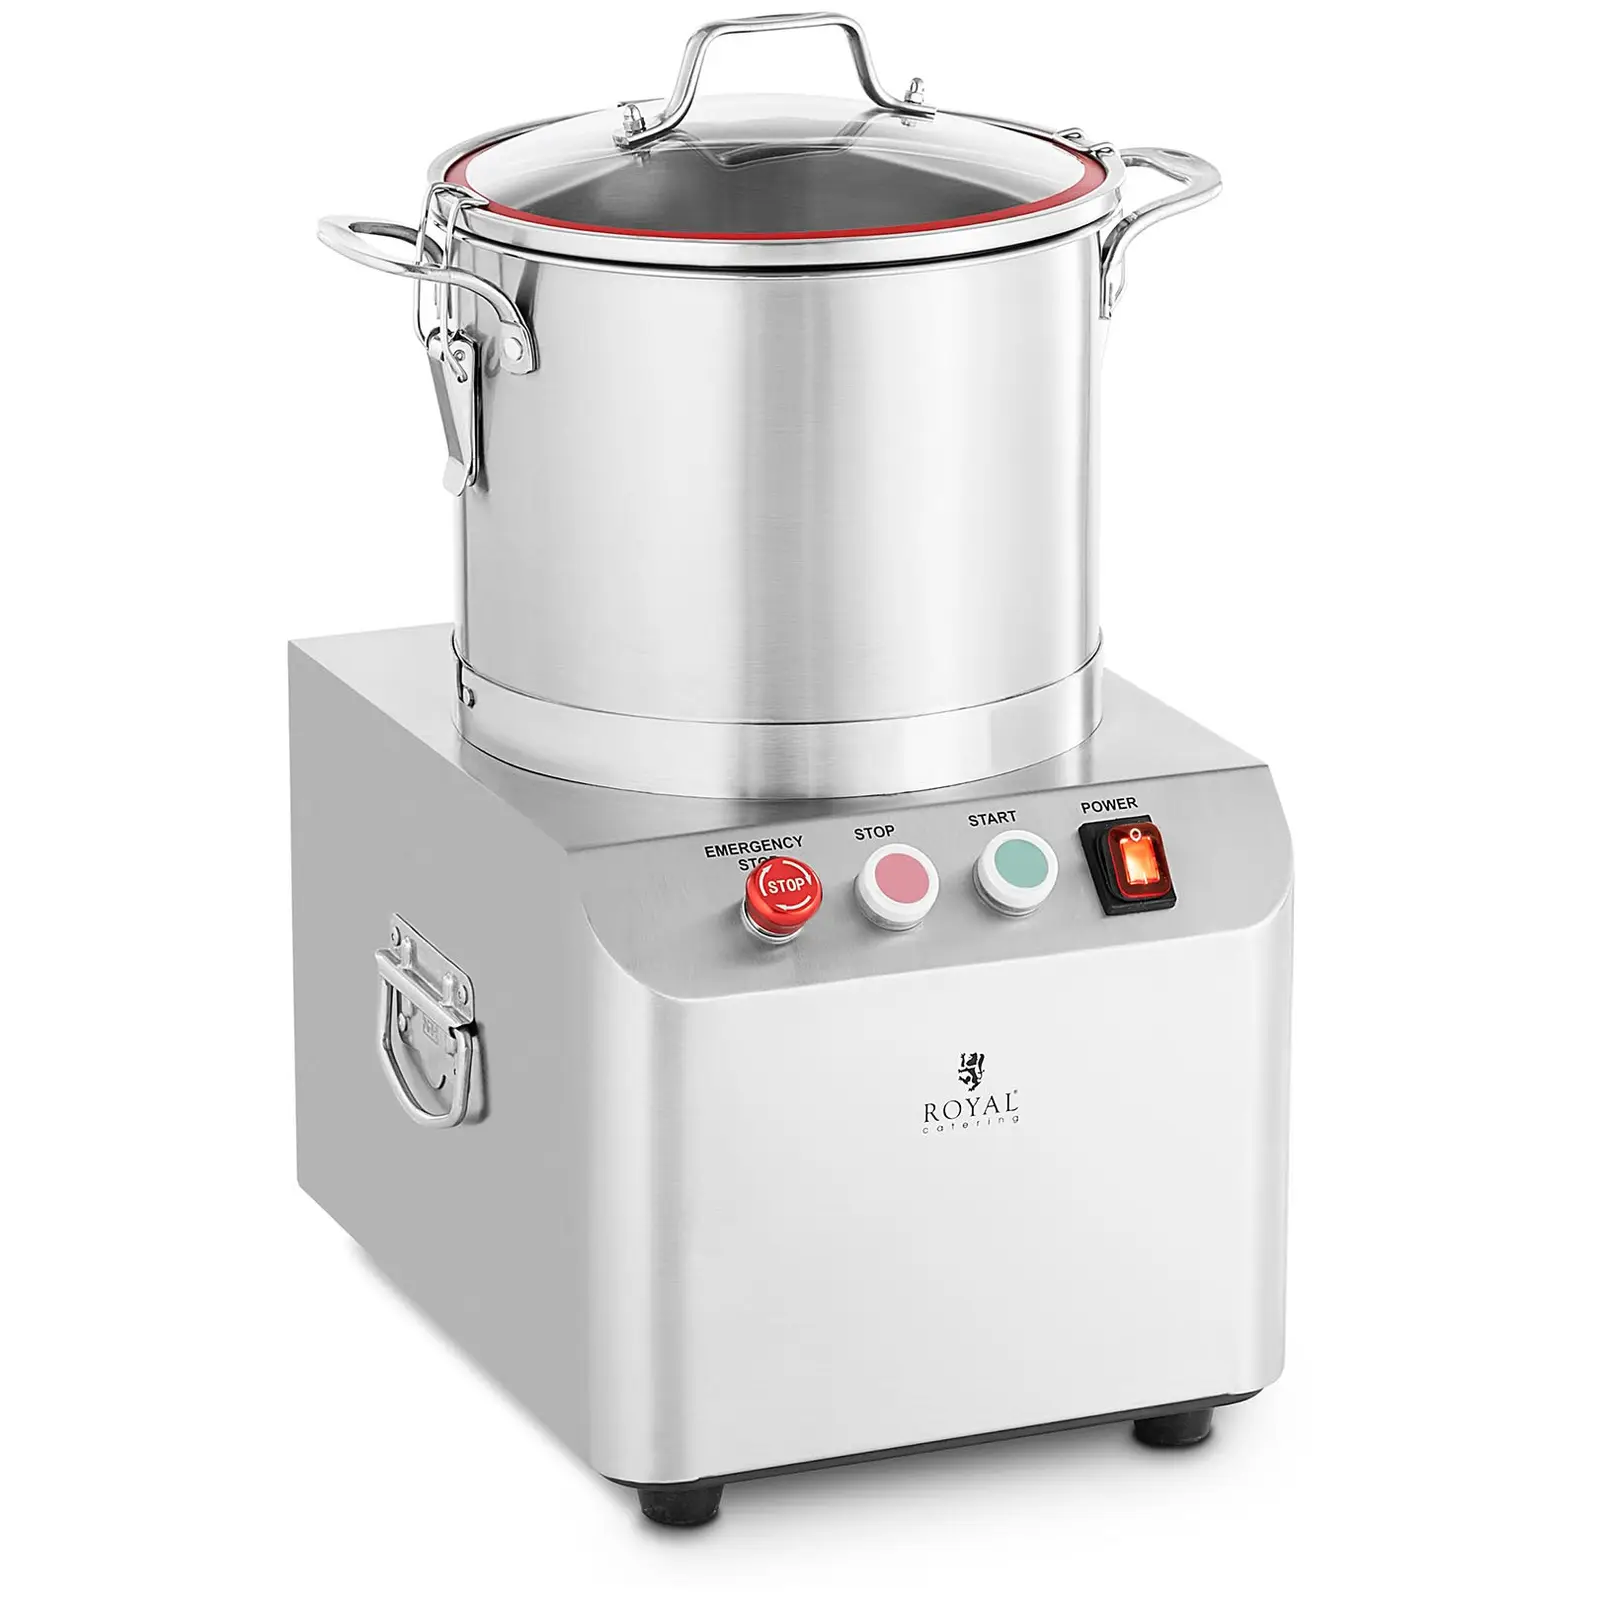 Tafelsnijder - 1400 RPM - Royal Catering - 8 l